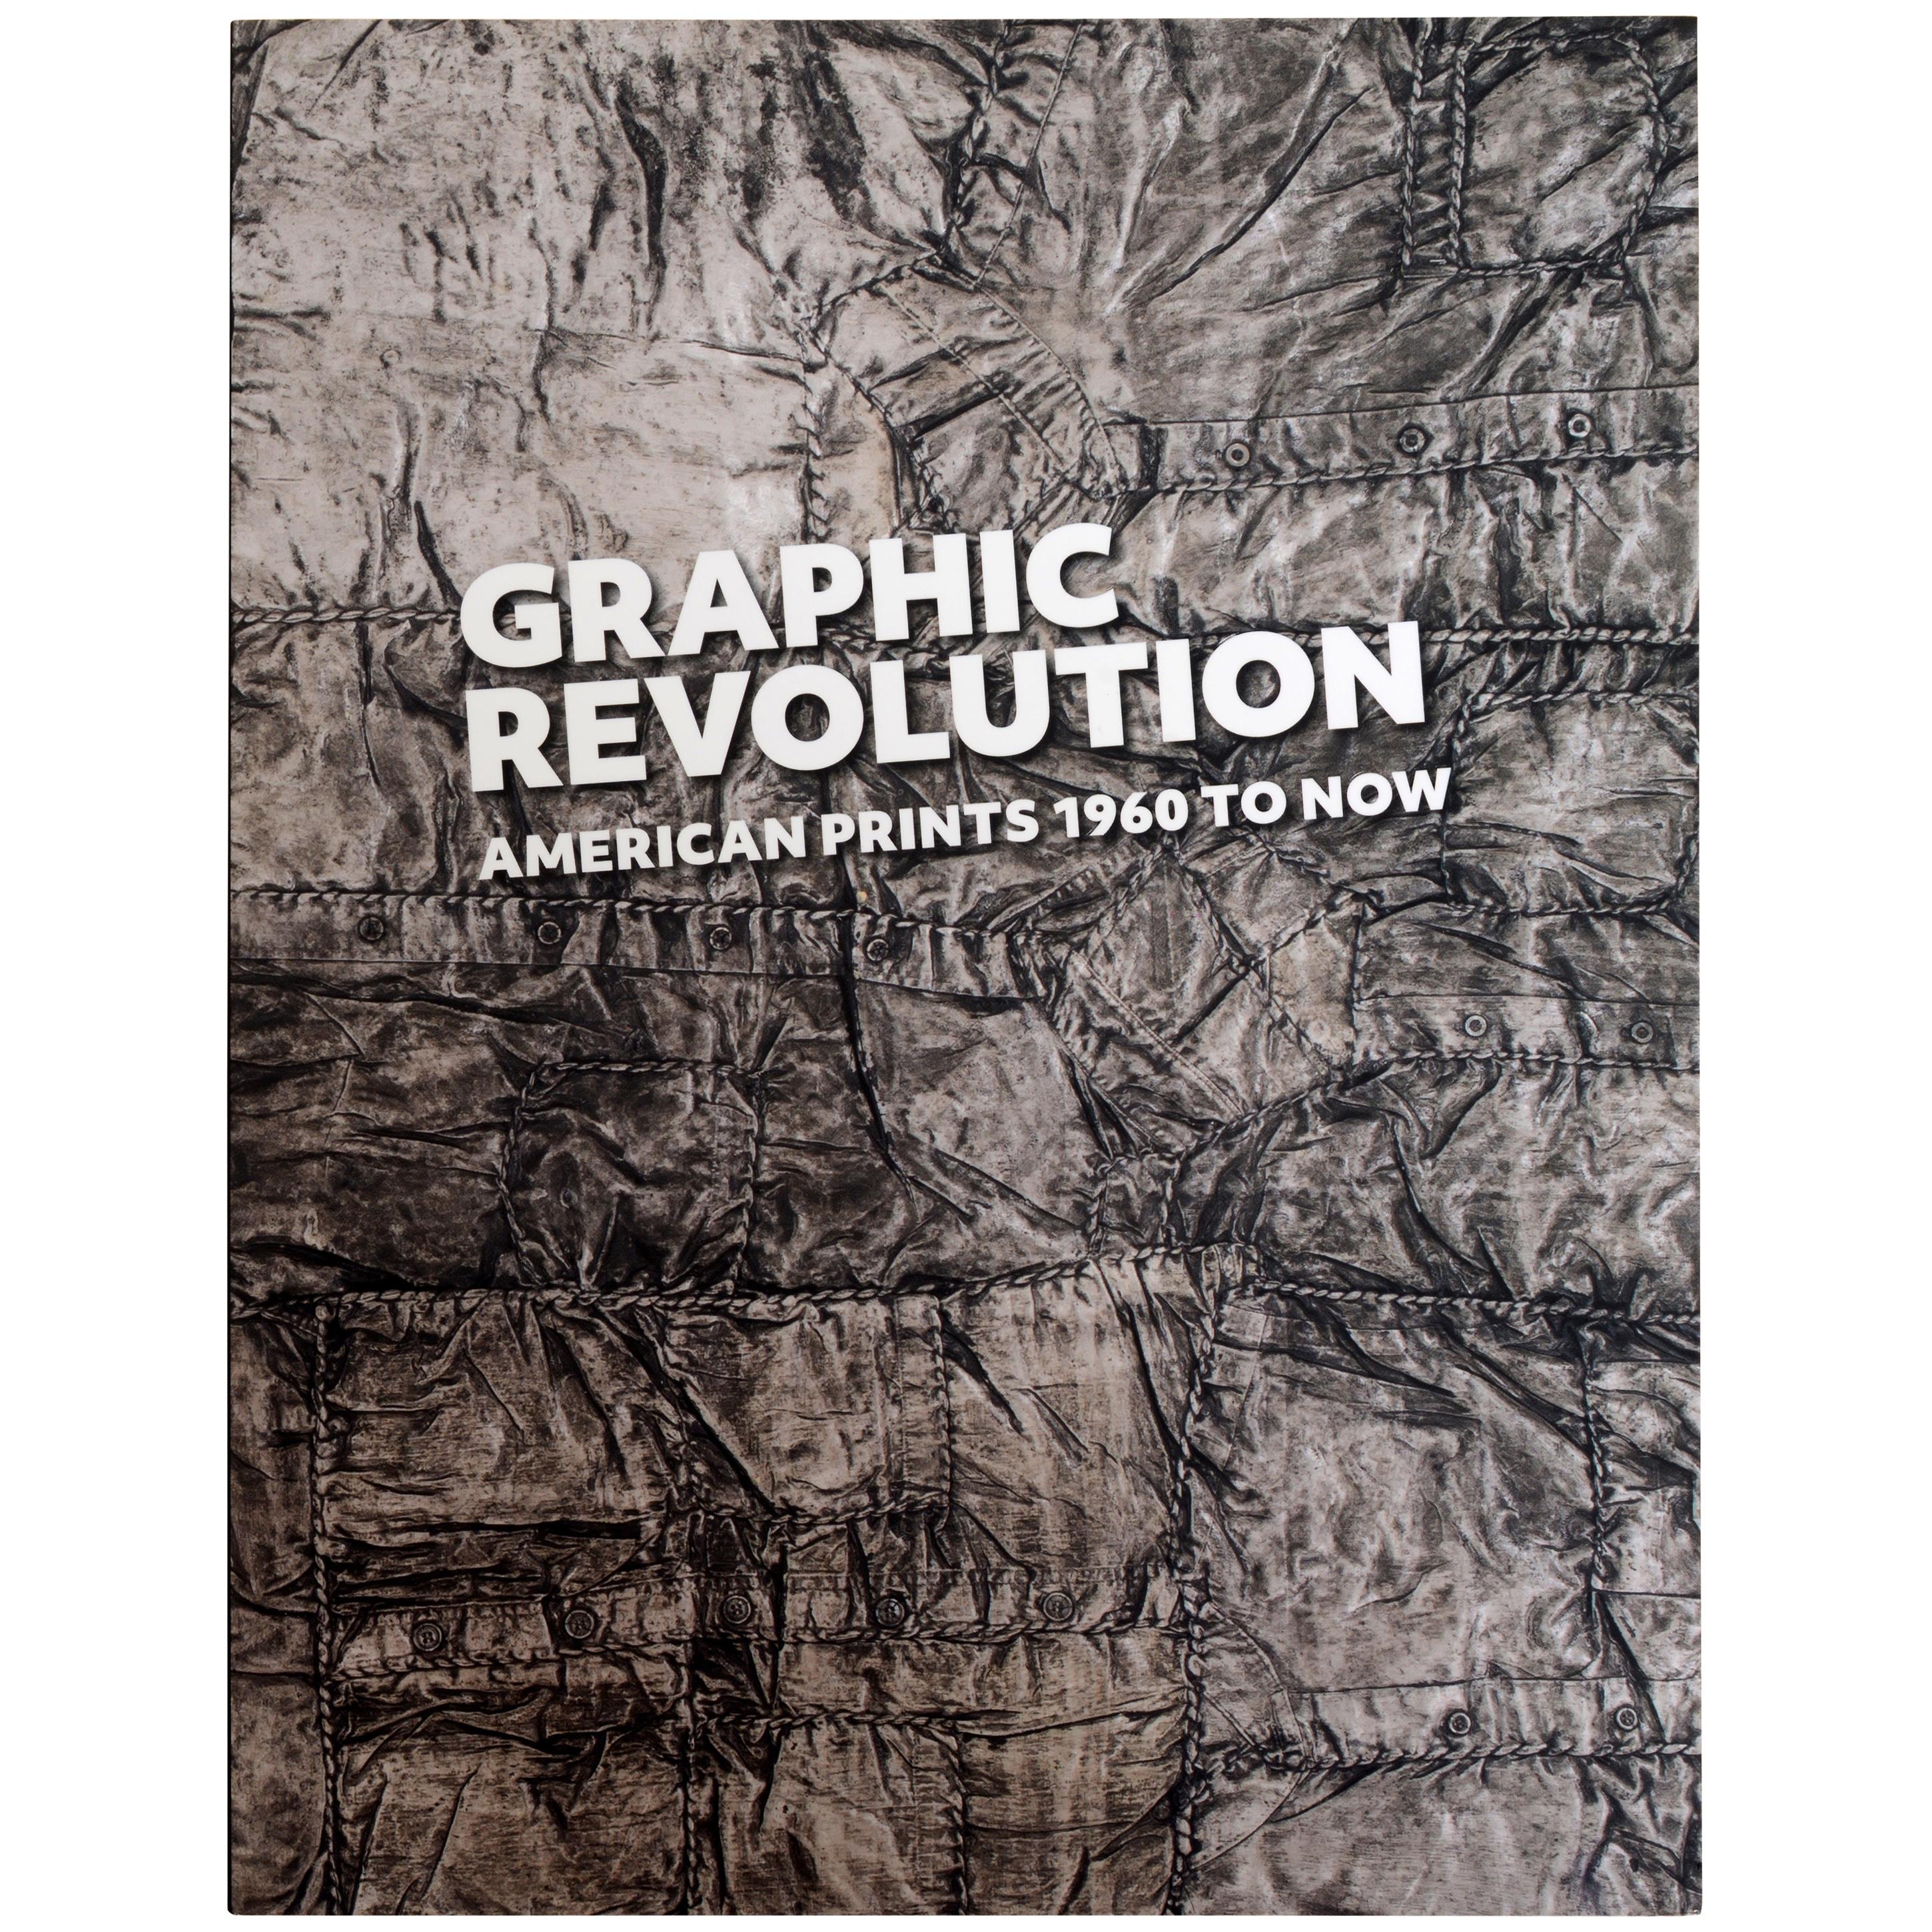 Graphic Revolution American Prints 1960 to Now by Elizabeth Wyckoff, 1st Ed